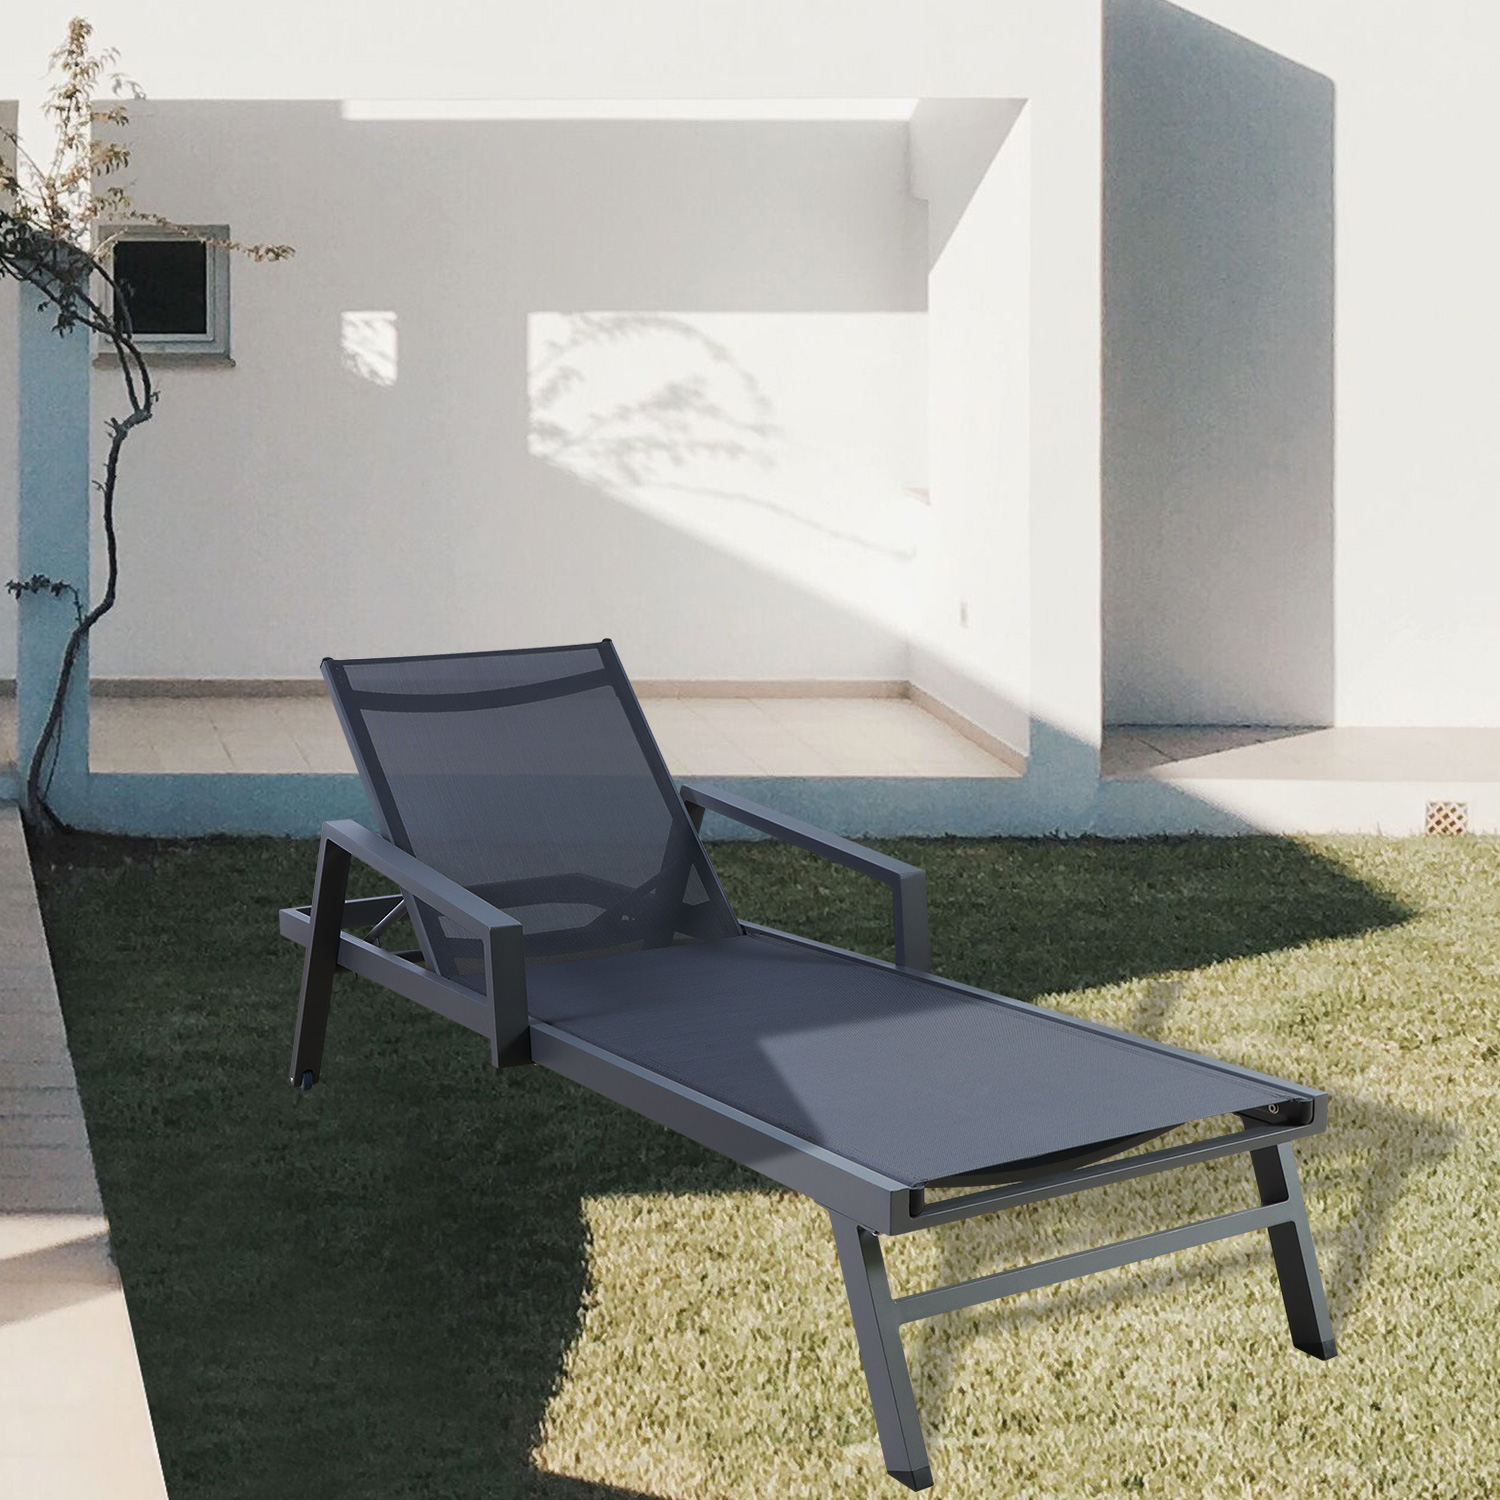 Aluminum Adjustable Outdoor Chaise Lounge